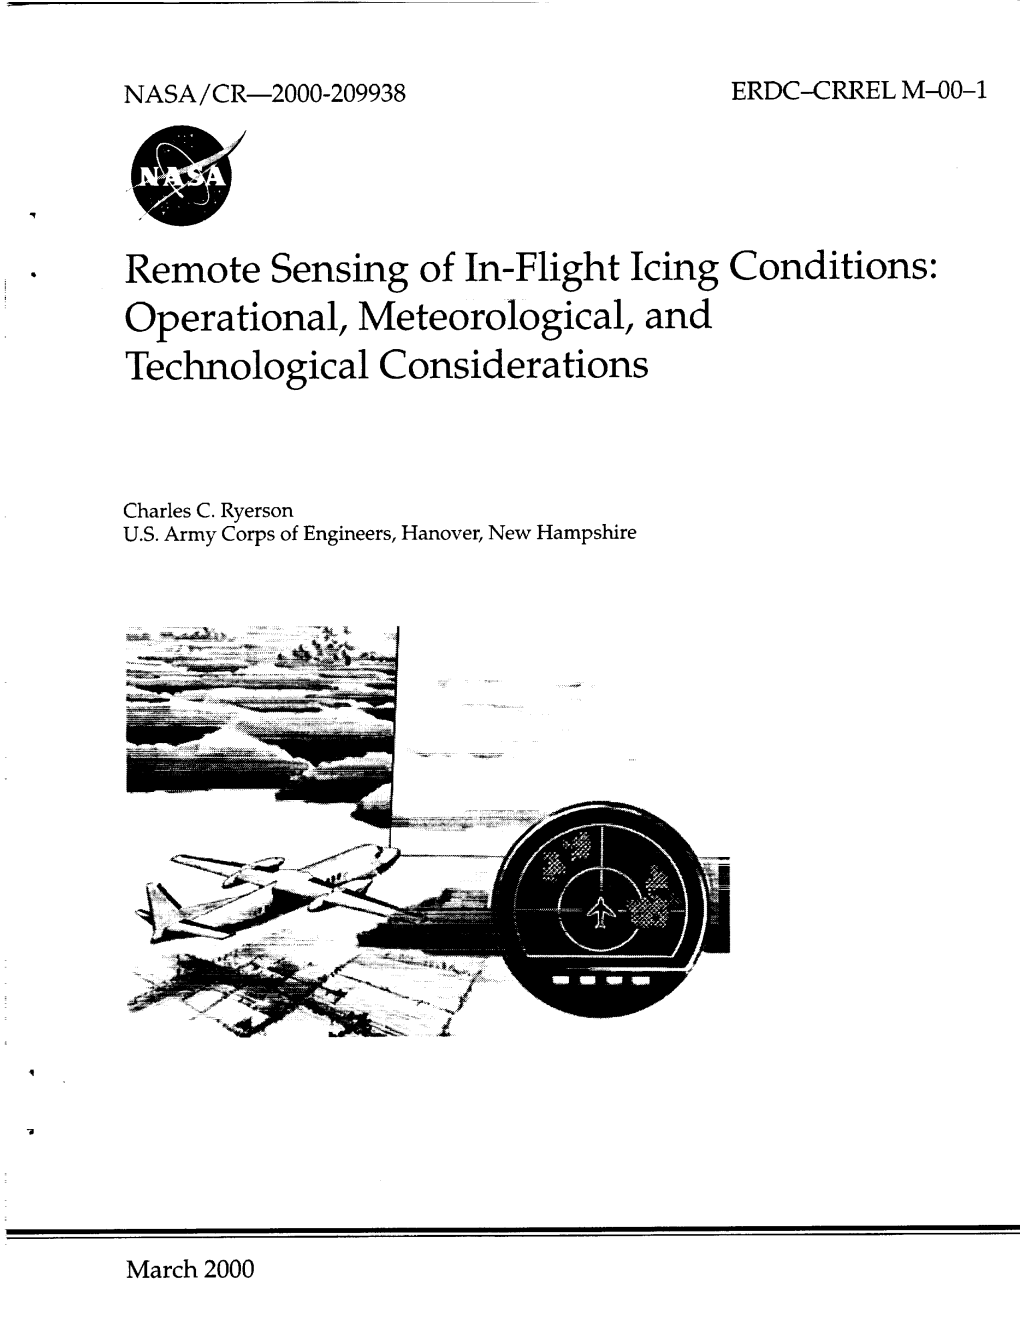 Remote Sensing of In-Flight Icing Conditions: Operational, Meteorological, and Technological Considerations